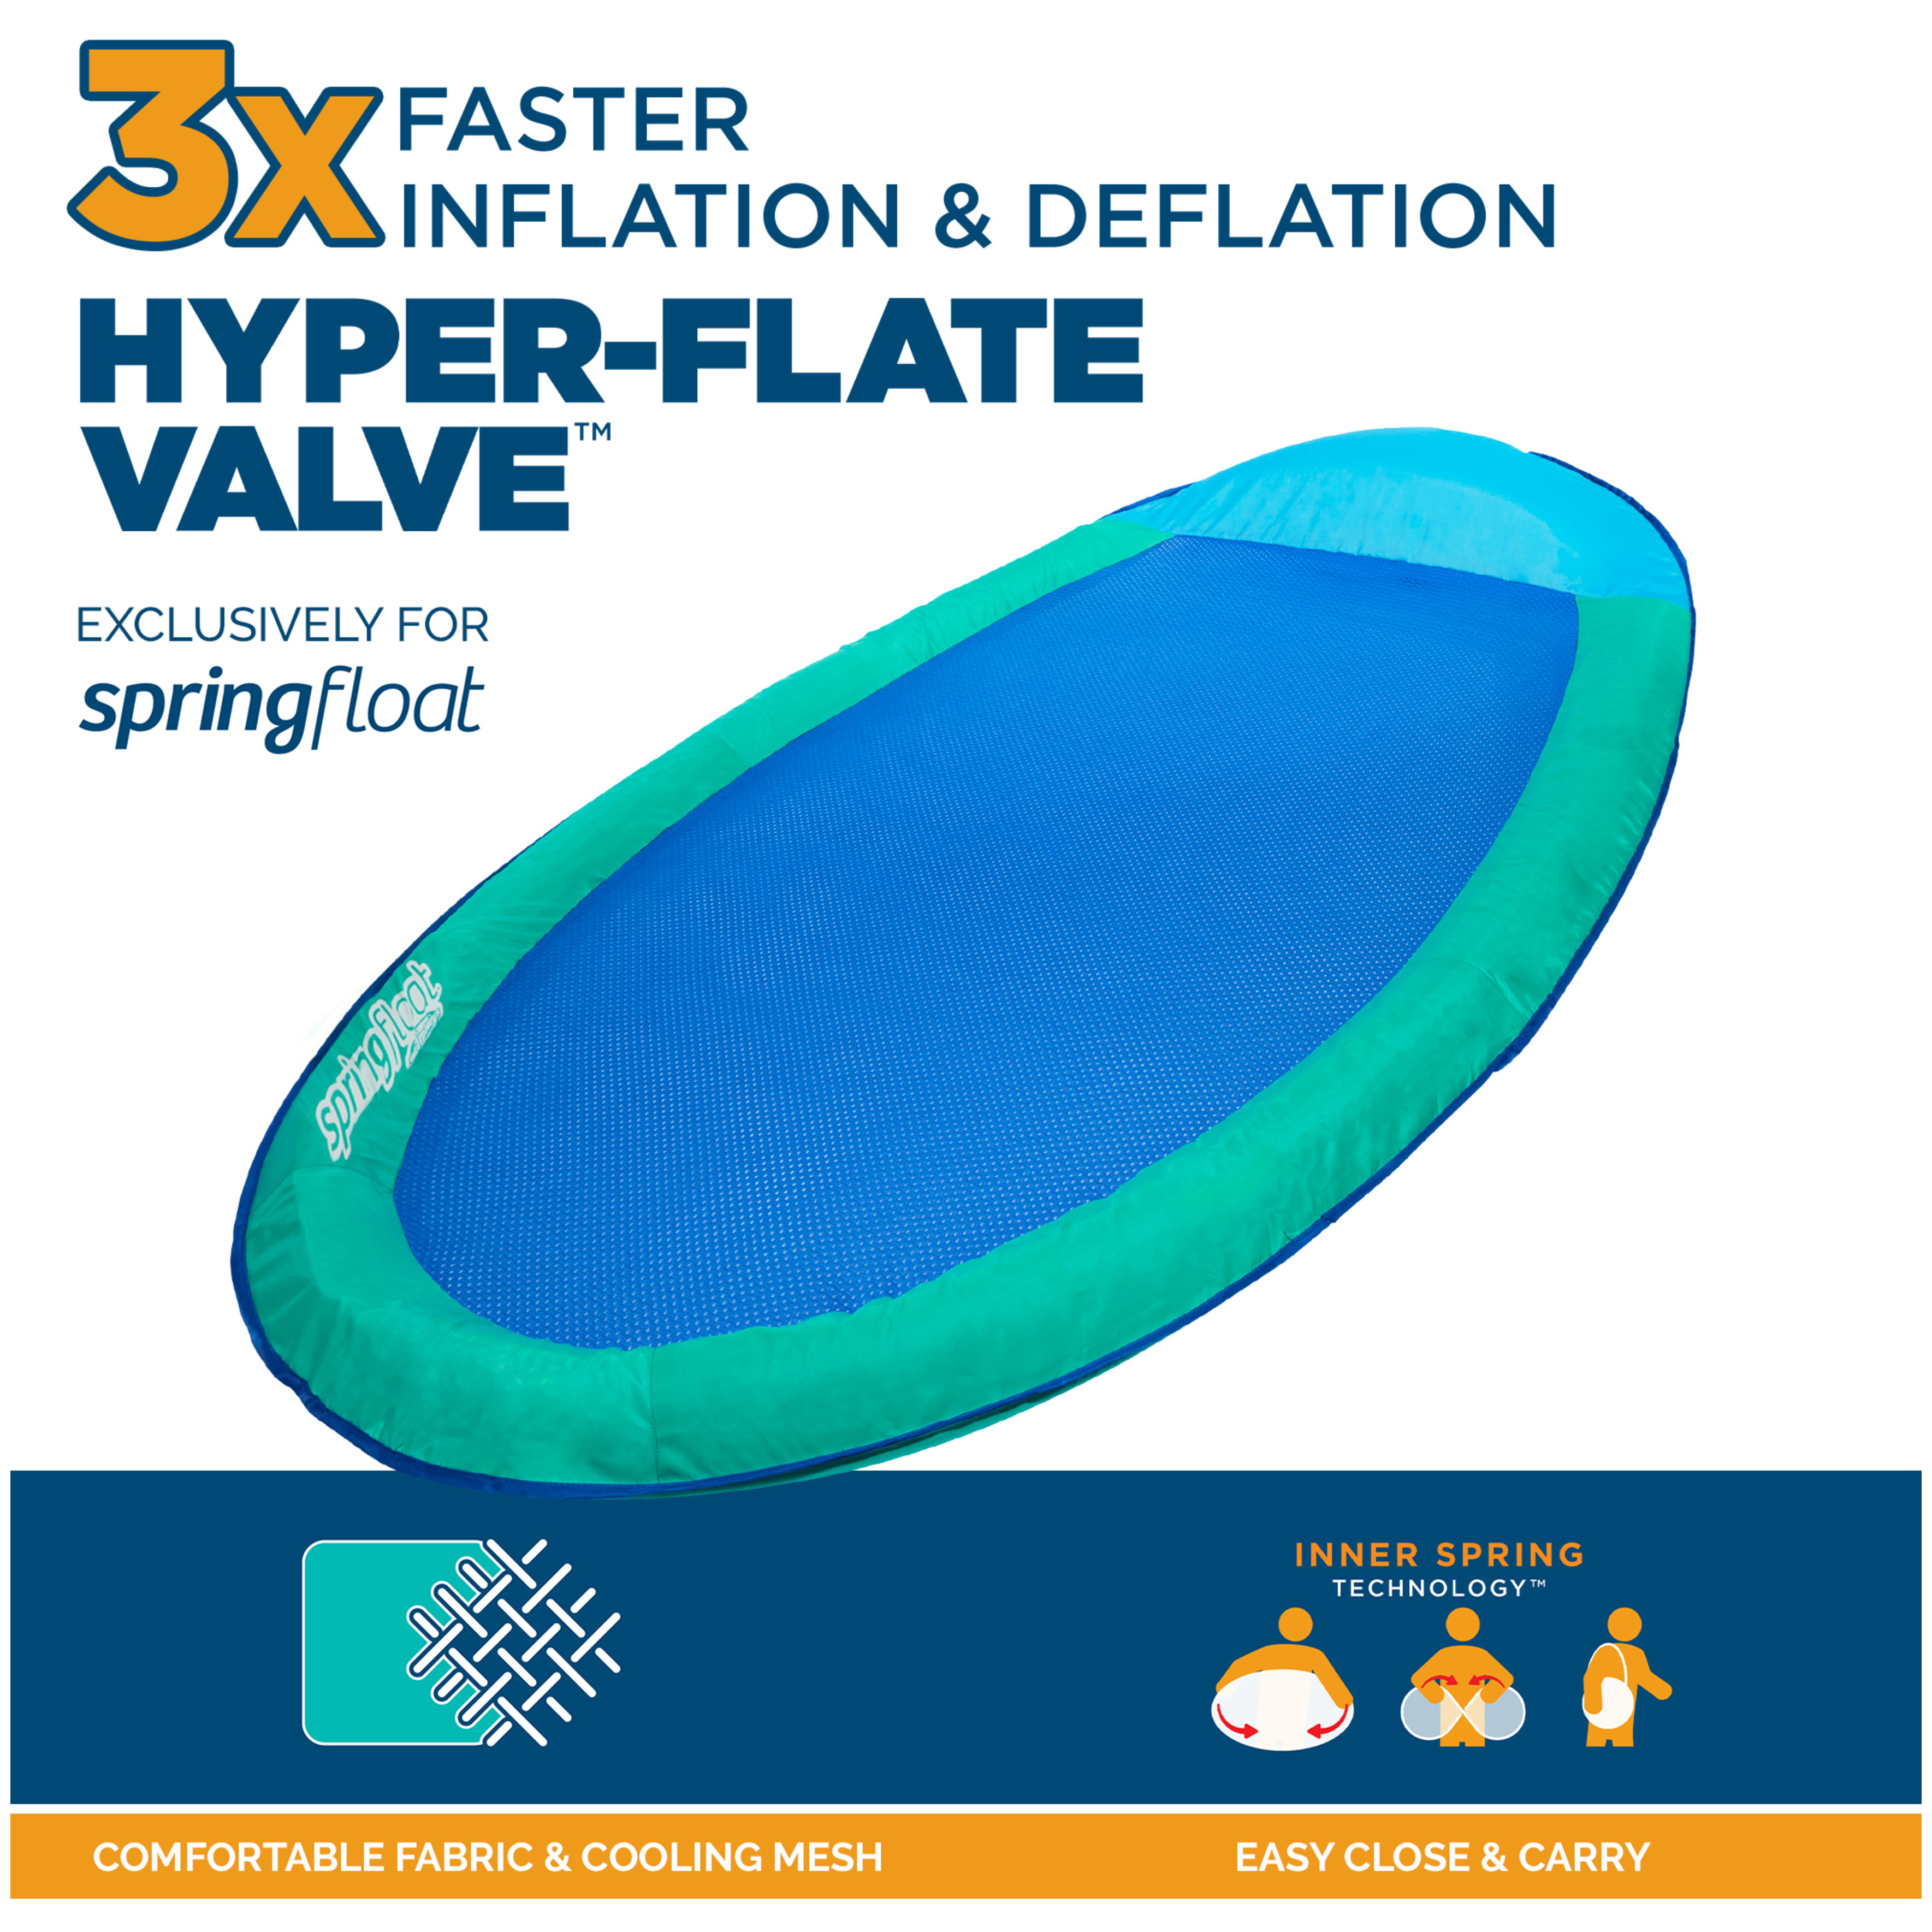 SwimWays Spring Float Inflatable Pool Lounger with Hyper-Flate Valve, Aqua - image 3 of 8